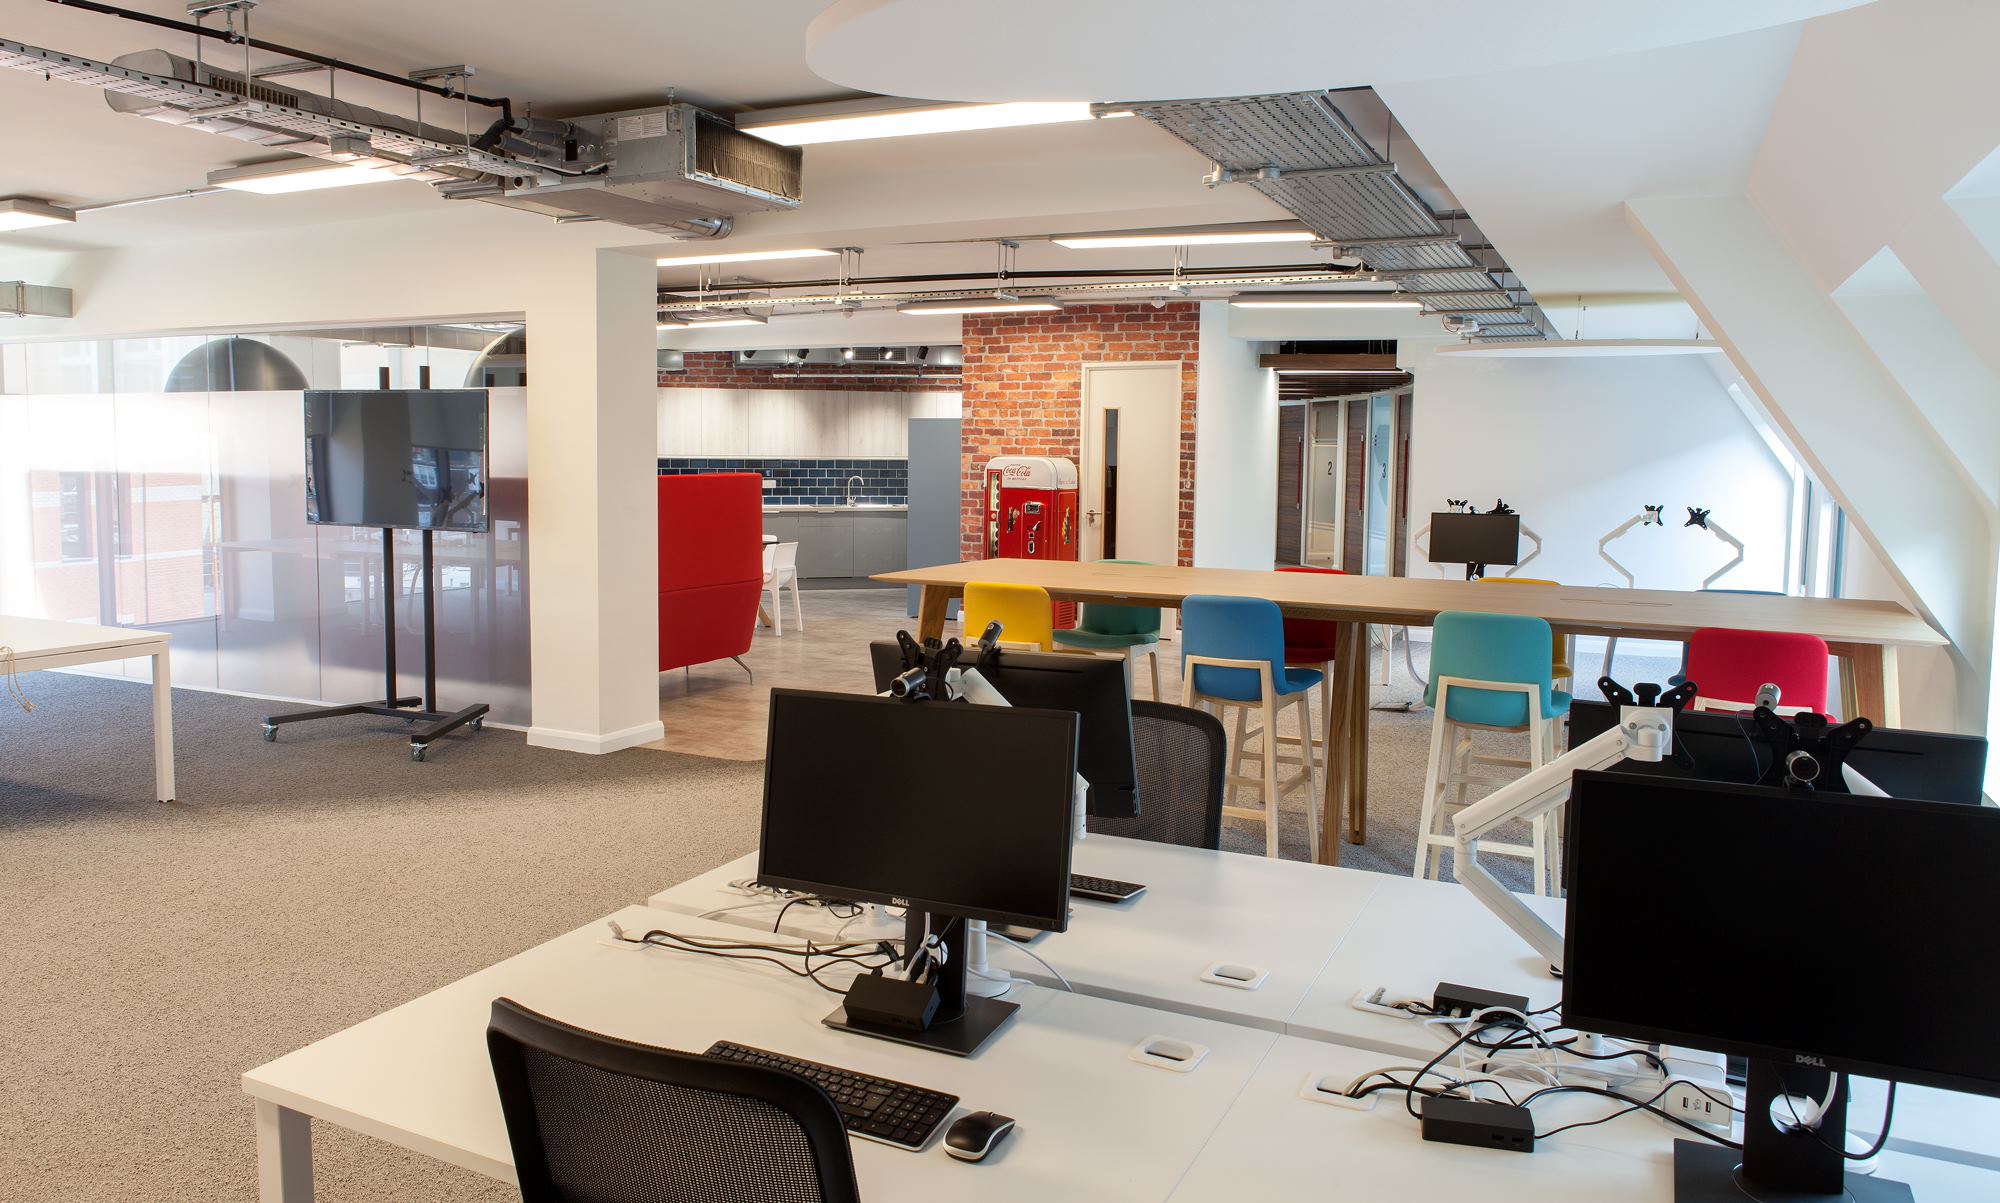 An office with desks and chairs, a television and a kitchen space in the background.